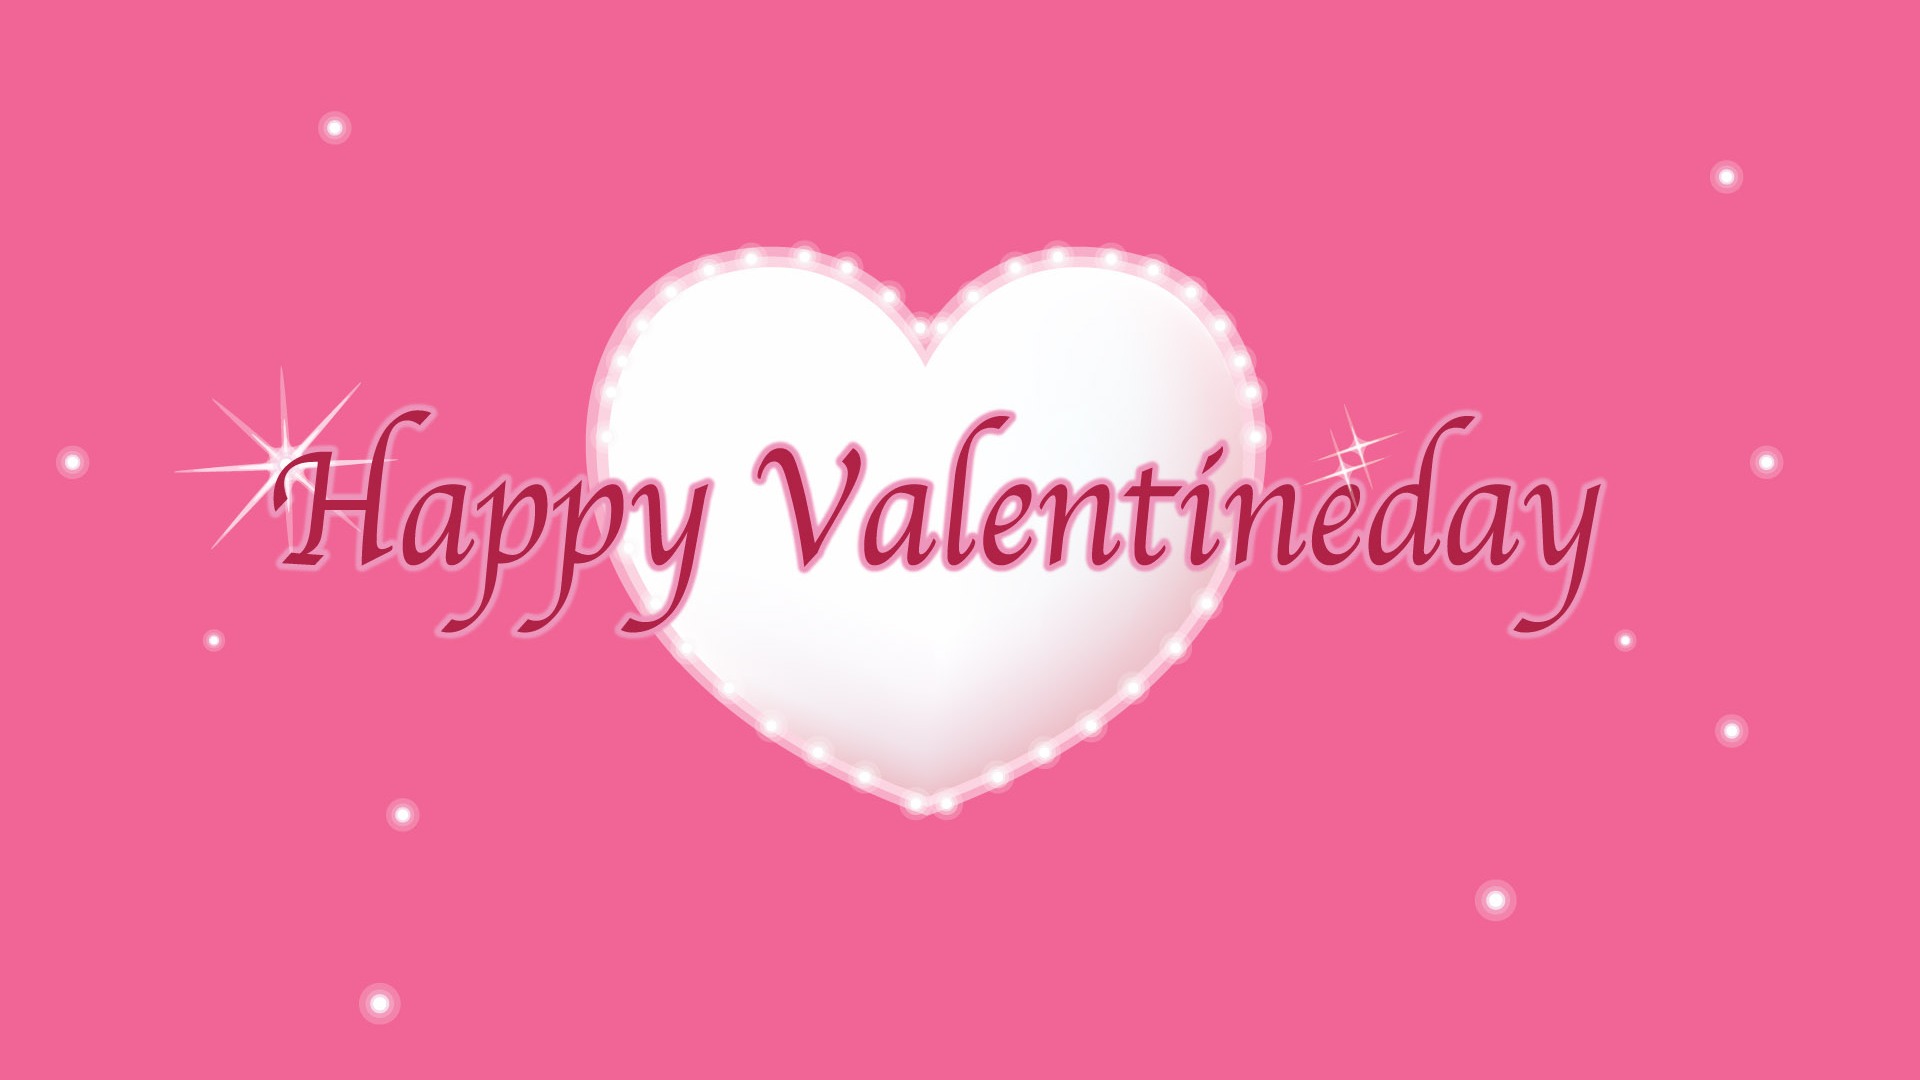 Valentine's Day Love Theme Wallpapers (3) #9 - 1920x1080